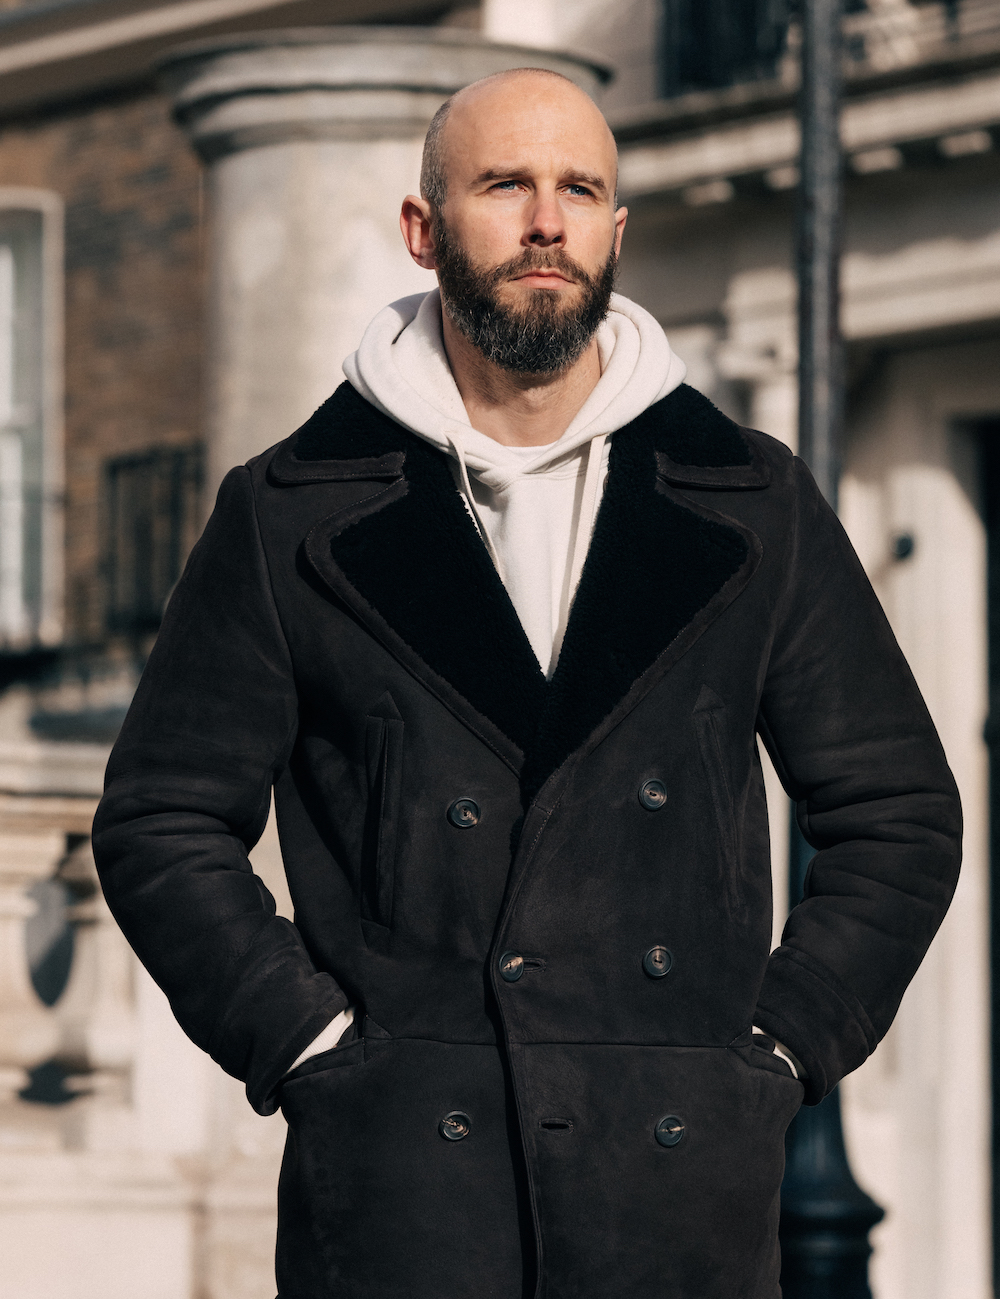 Cromford Leather and Permanent Style's collaboration luxury shearling coat